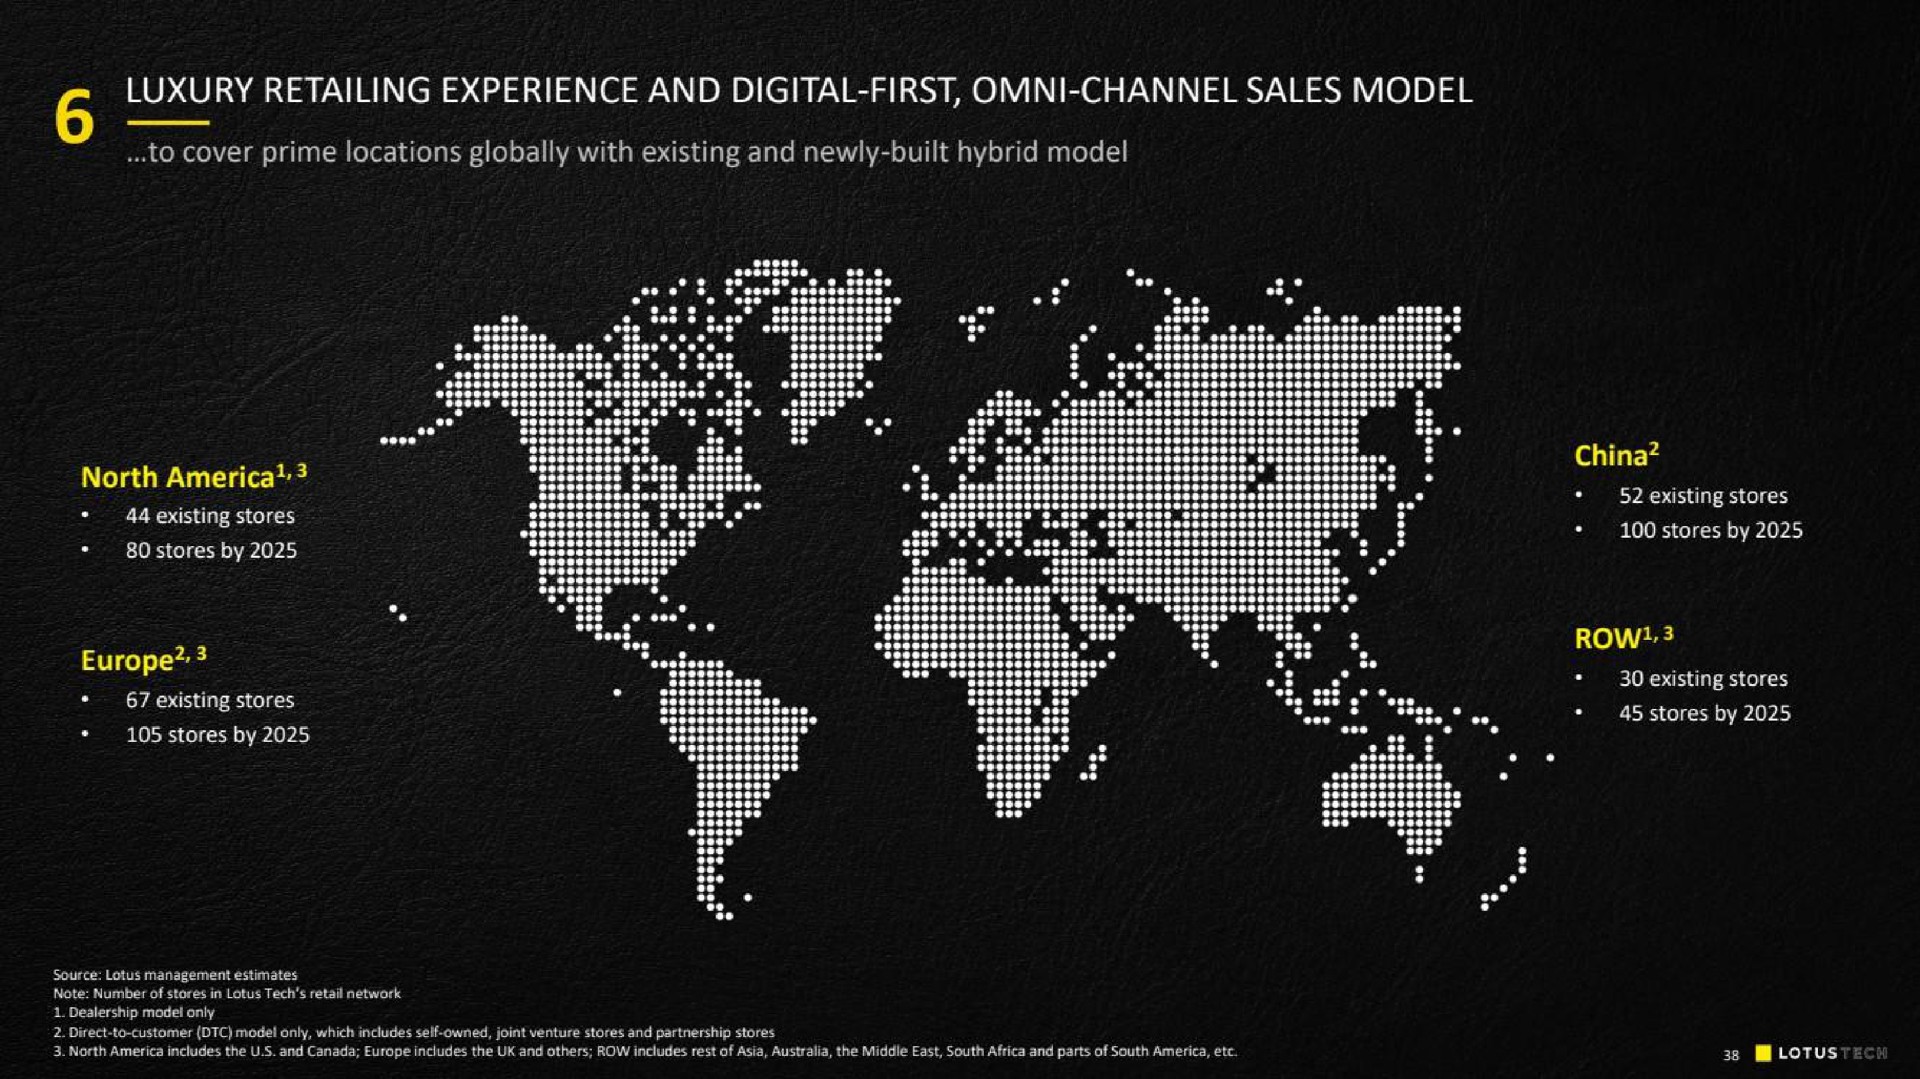 a luxury retailing experience and digital first channel sales model | Lotus Cars